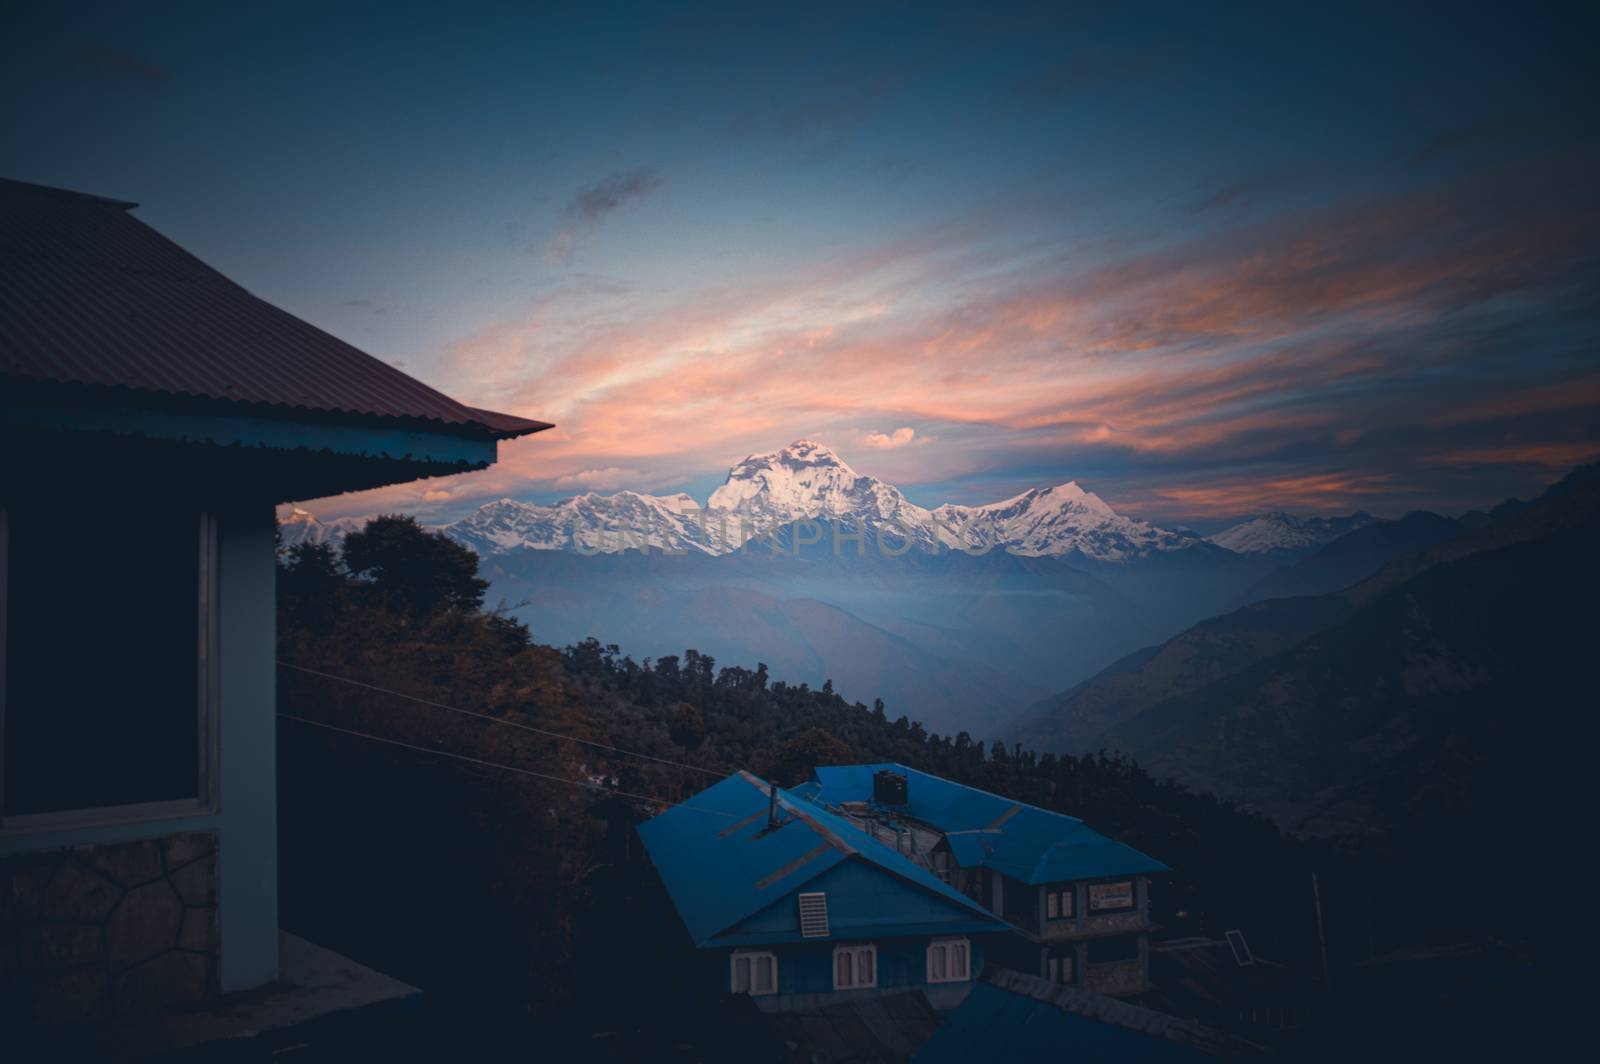 View of the Annapurna Mountain Range by Sonnet15